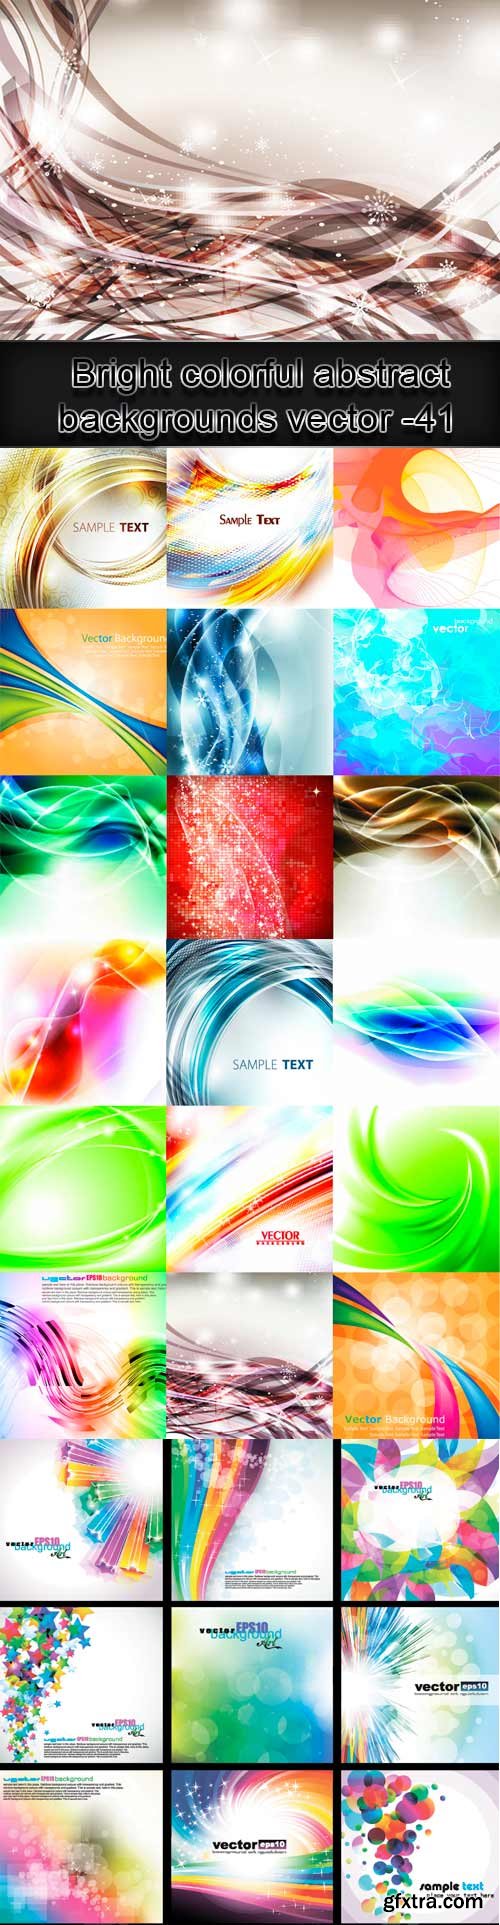 Bright colorful abstract backgrounds vector -41